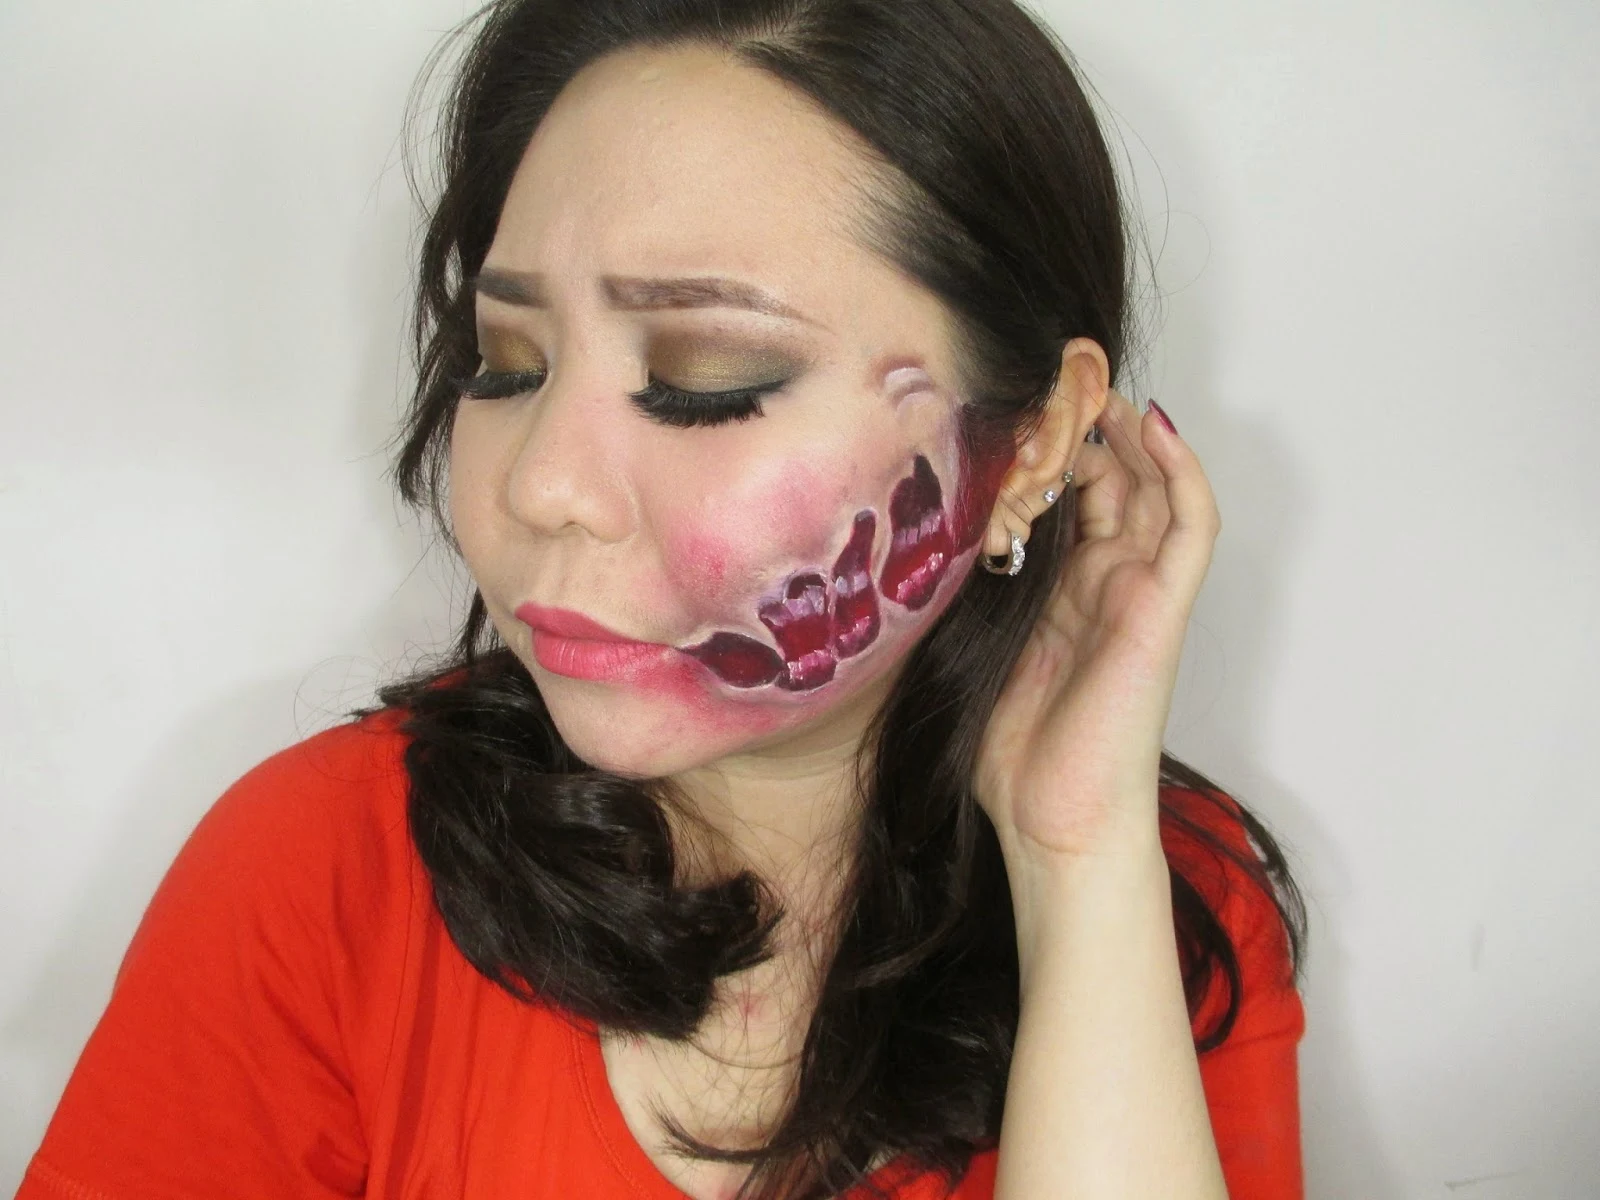 EASY 3D ILLUSIONS SKIN TORN AND STRETCH WITH FACE PAINTING MAKEUP